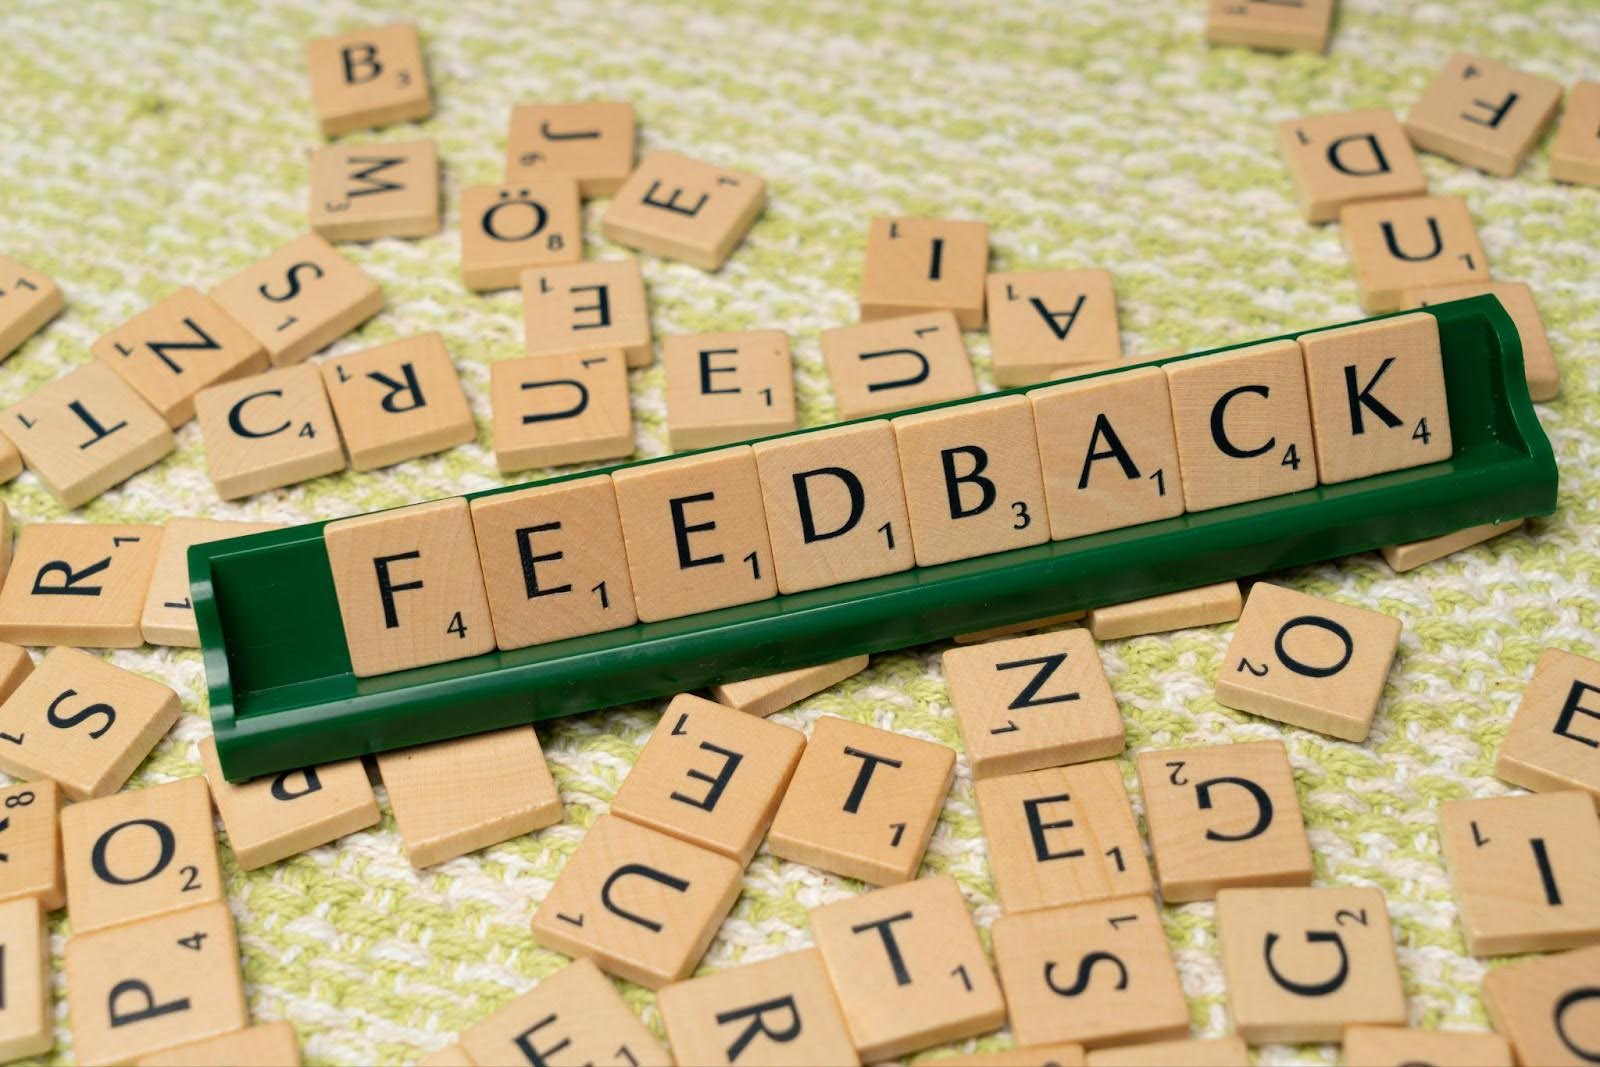 50 Employee Feedback Surveys Questions To Improve Your Work Culture